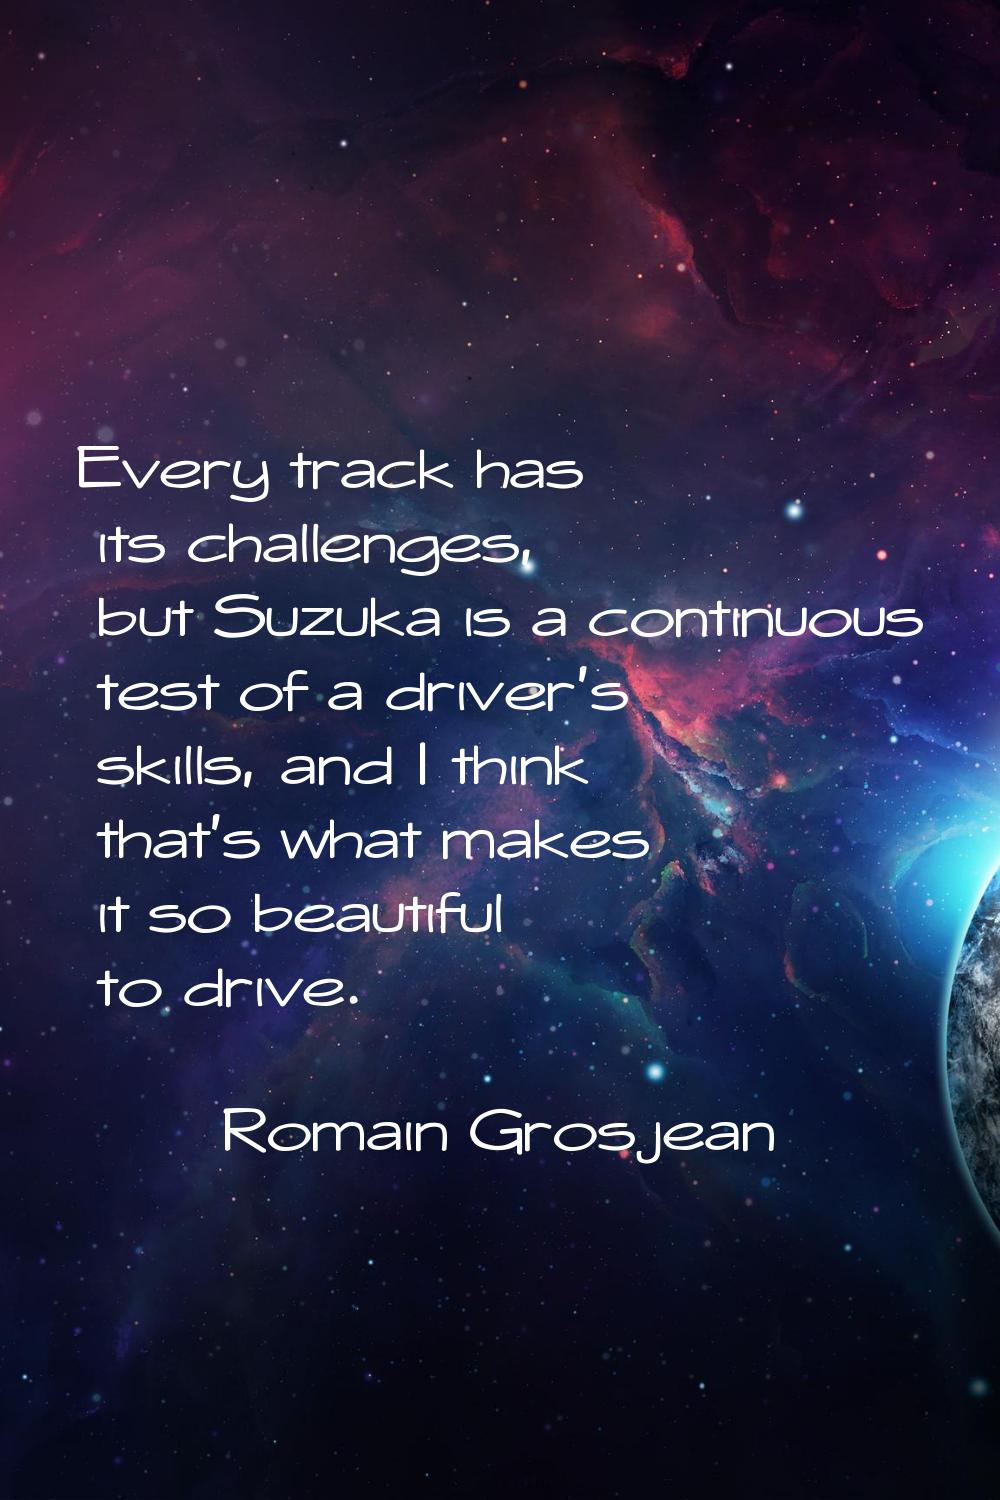 Every track has its challenges, but Suzuka is a continuous test of a driver's skills, and I think t